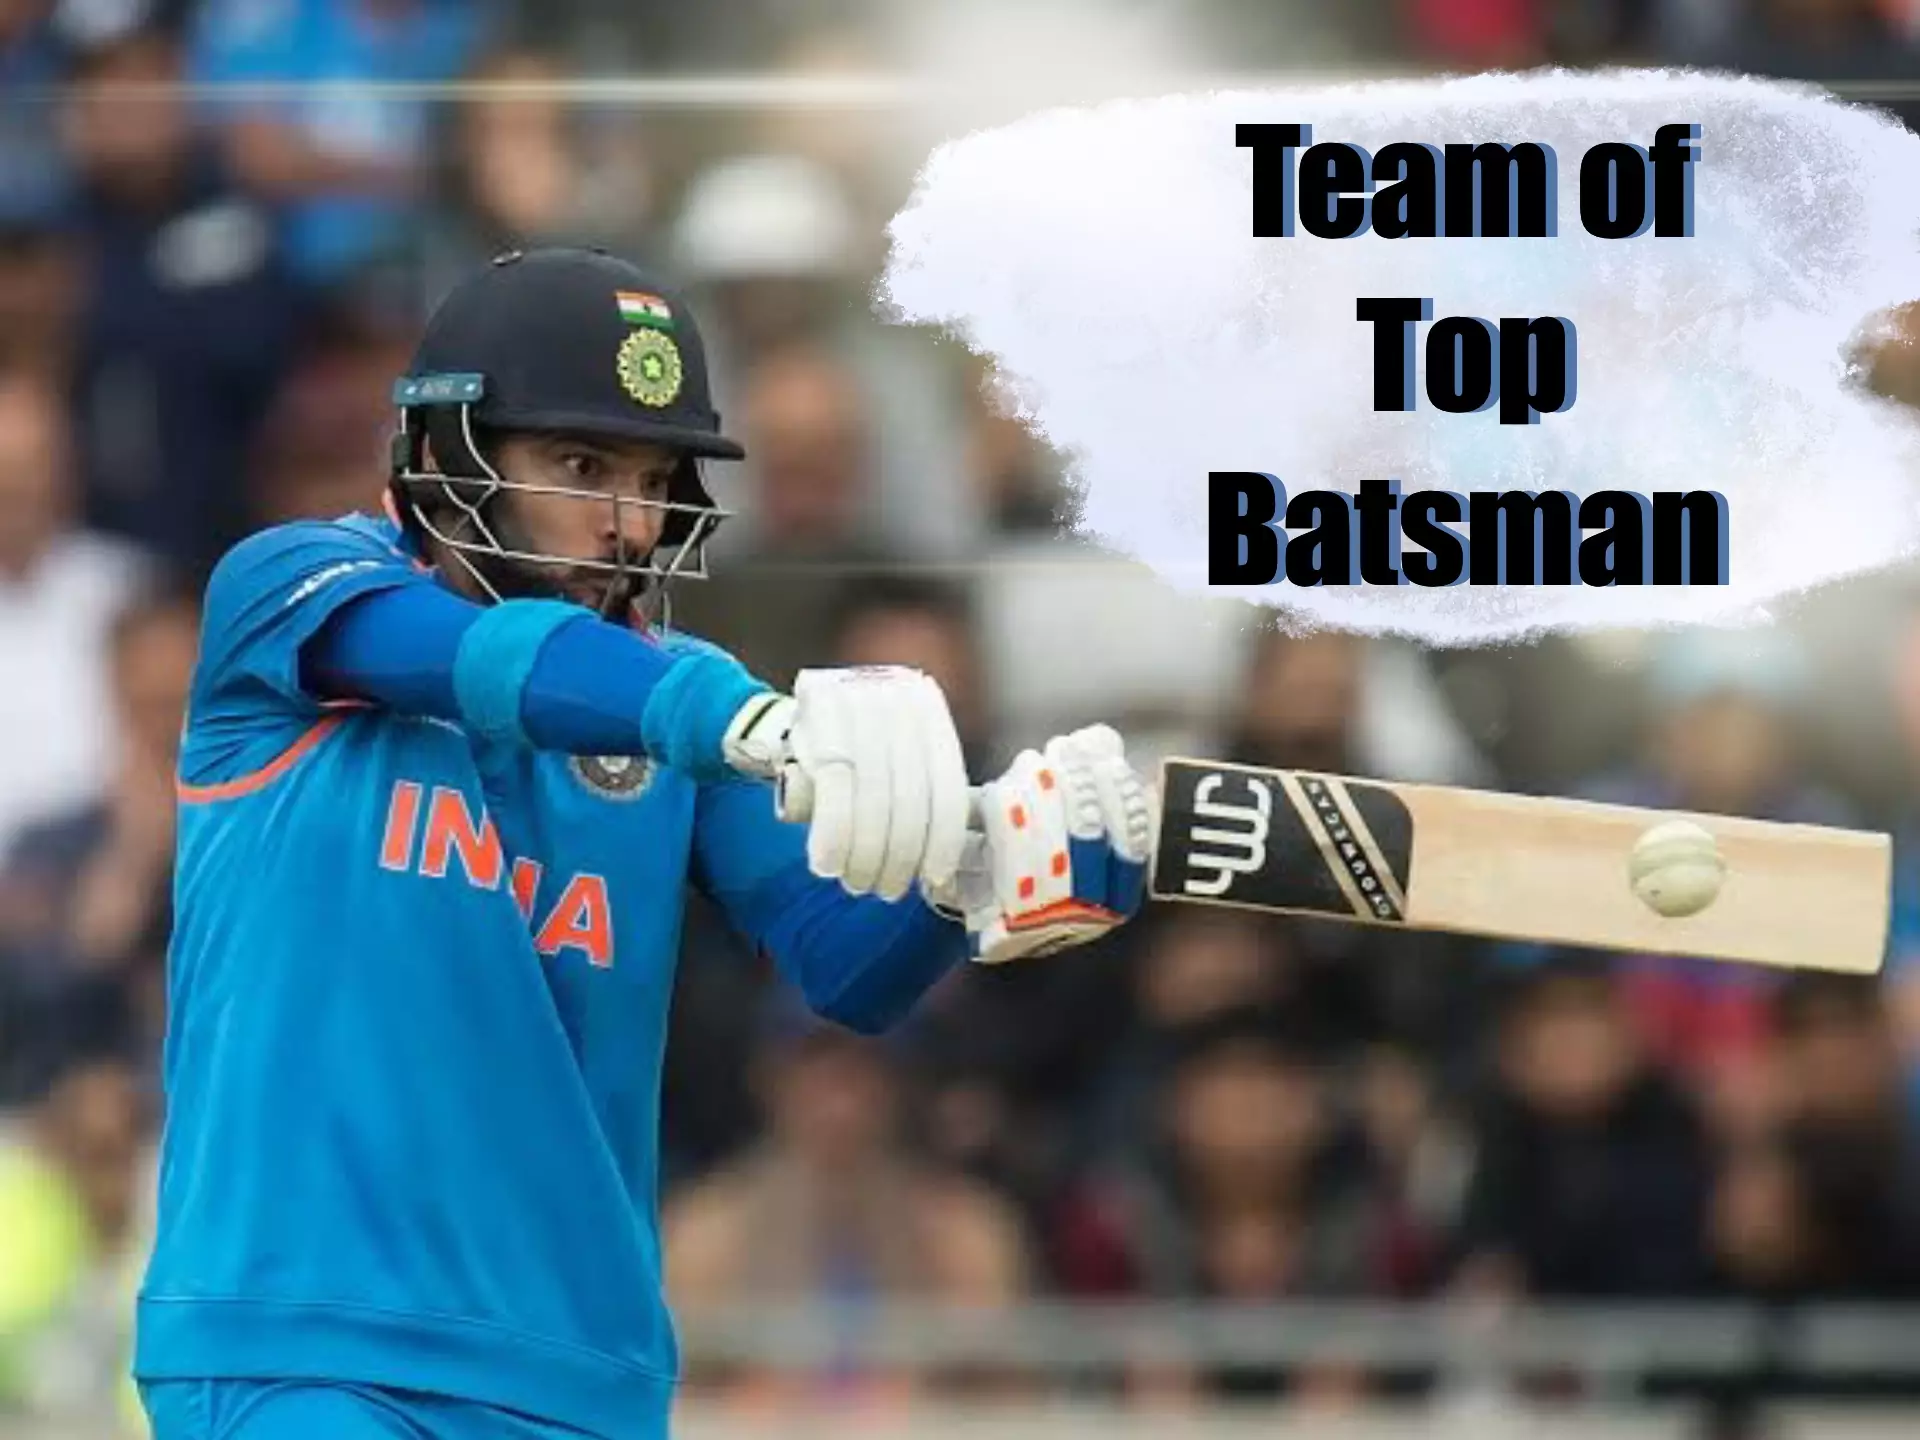 Bet on Team of top batsman with the help of our tips.